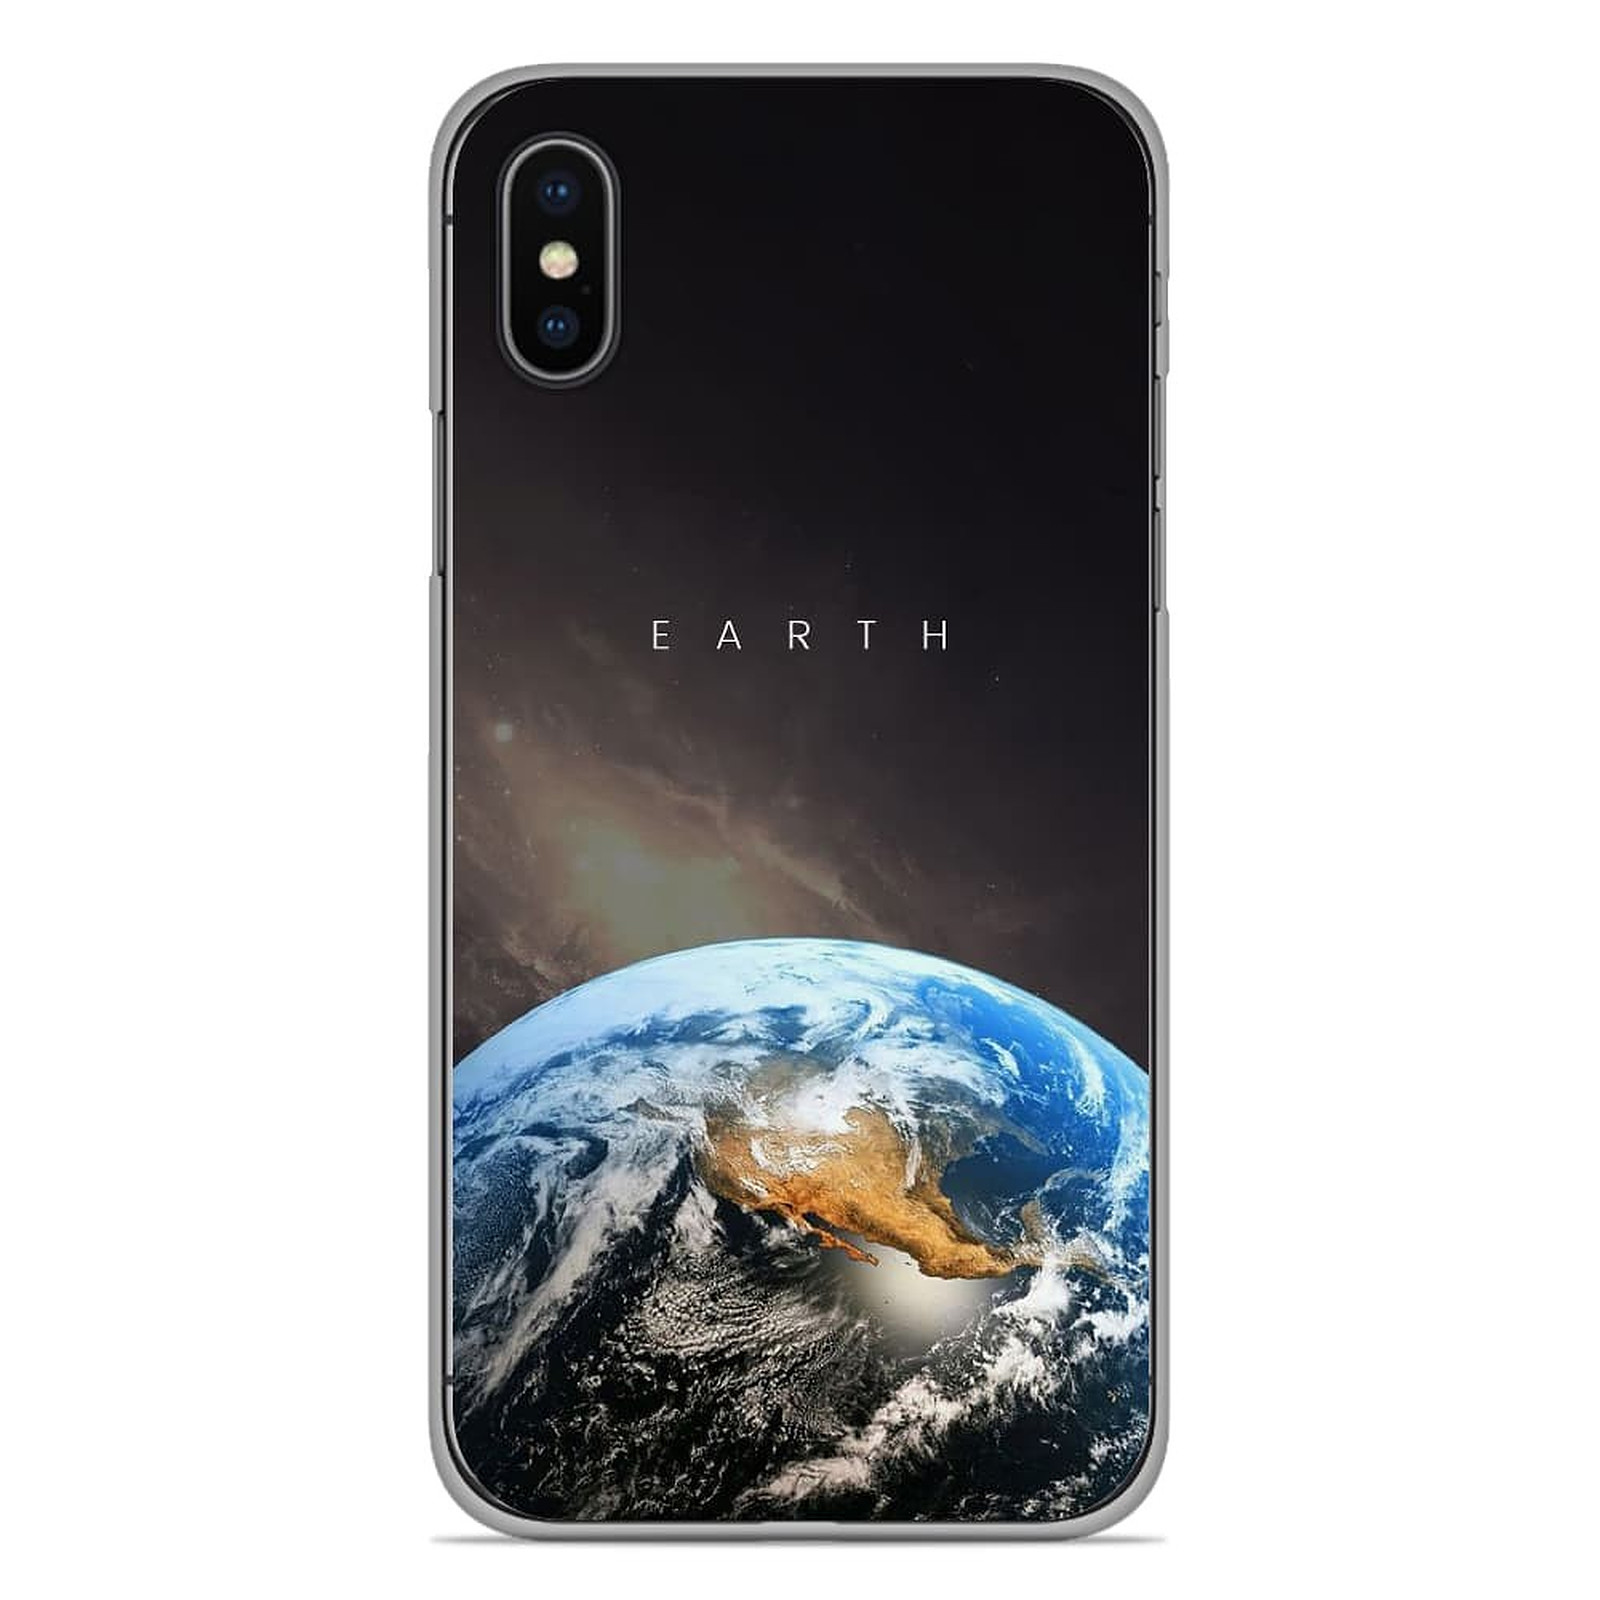 1001 Coques Coque silicone gel Apple iPhone X / XS motif Earth - Coque telephone 1001Coques